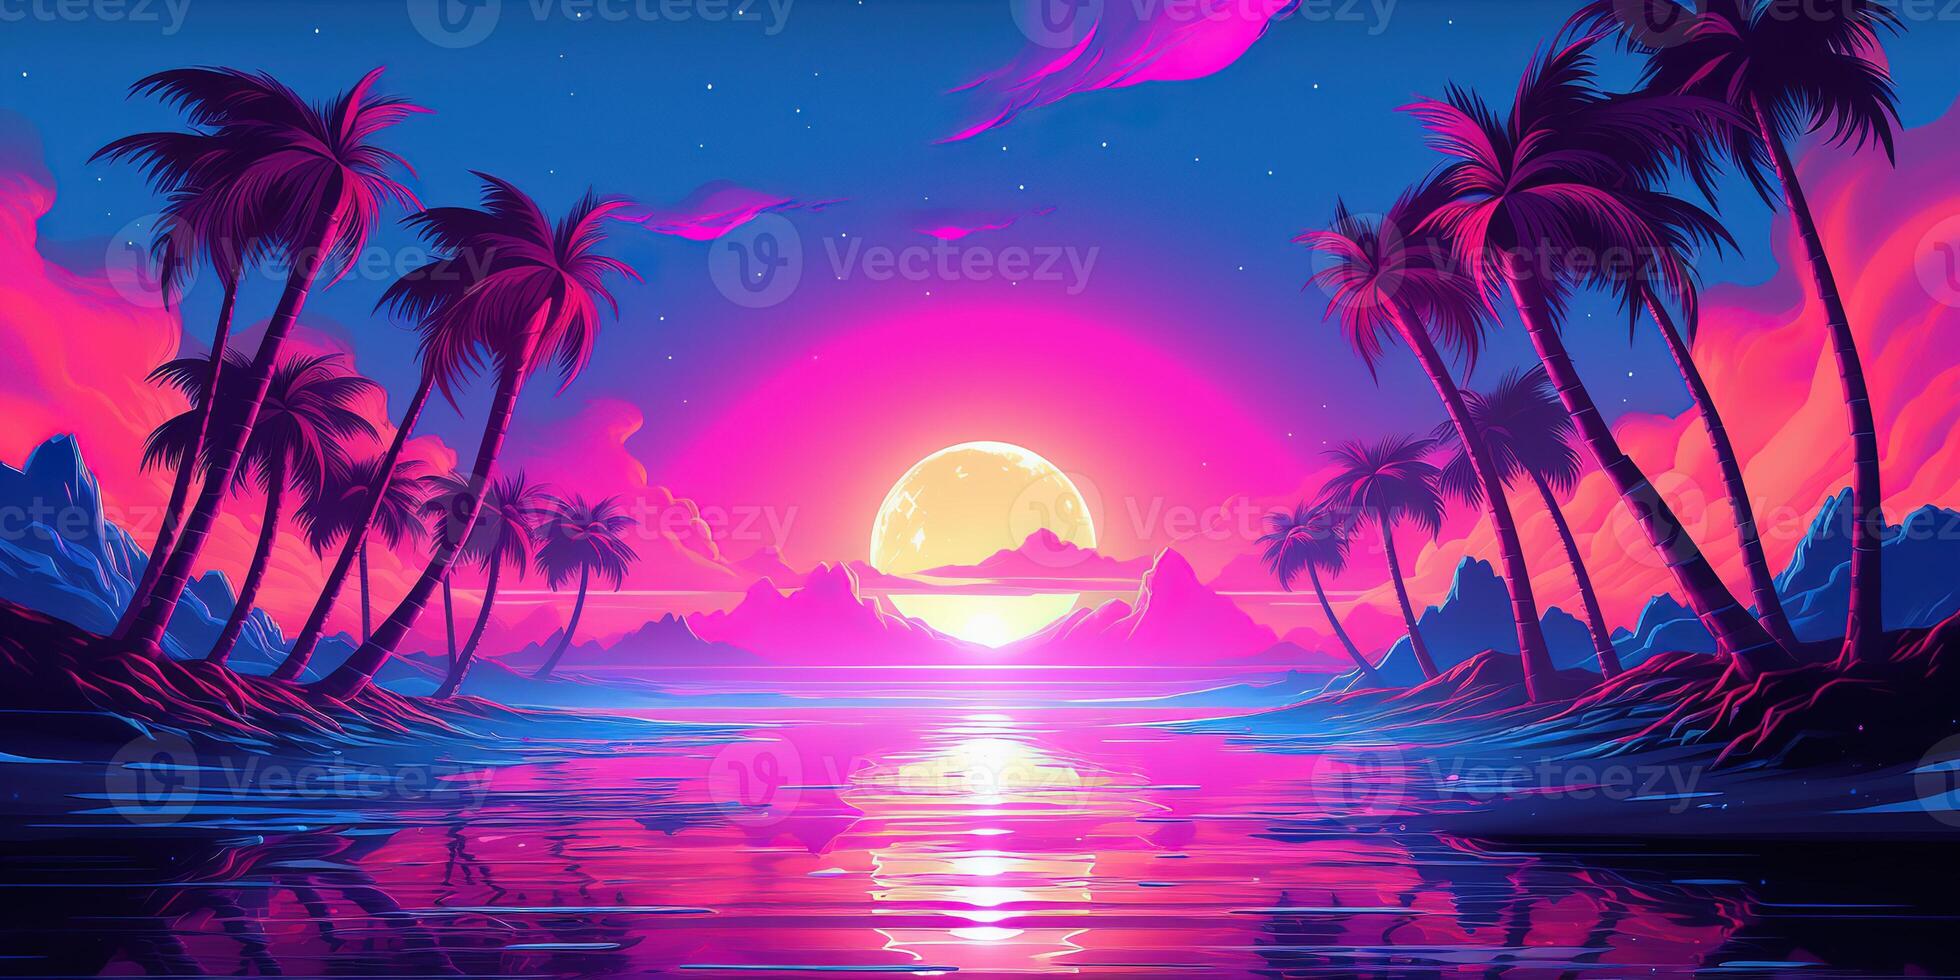 Aesthetic beach synthwave retrowave wallpaper with a cool and vibrant neon design, photo